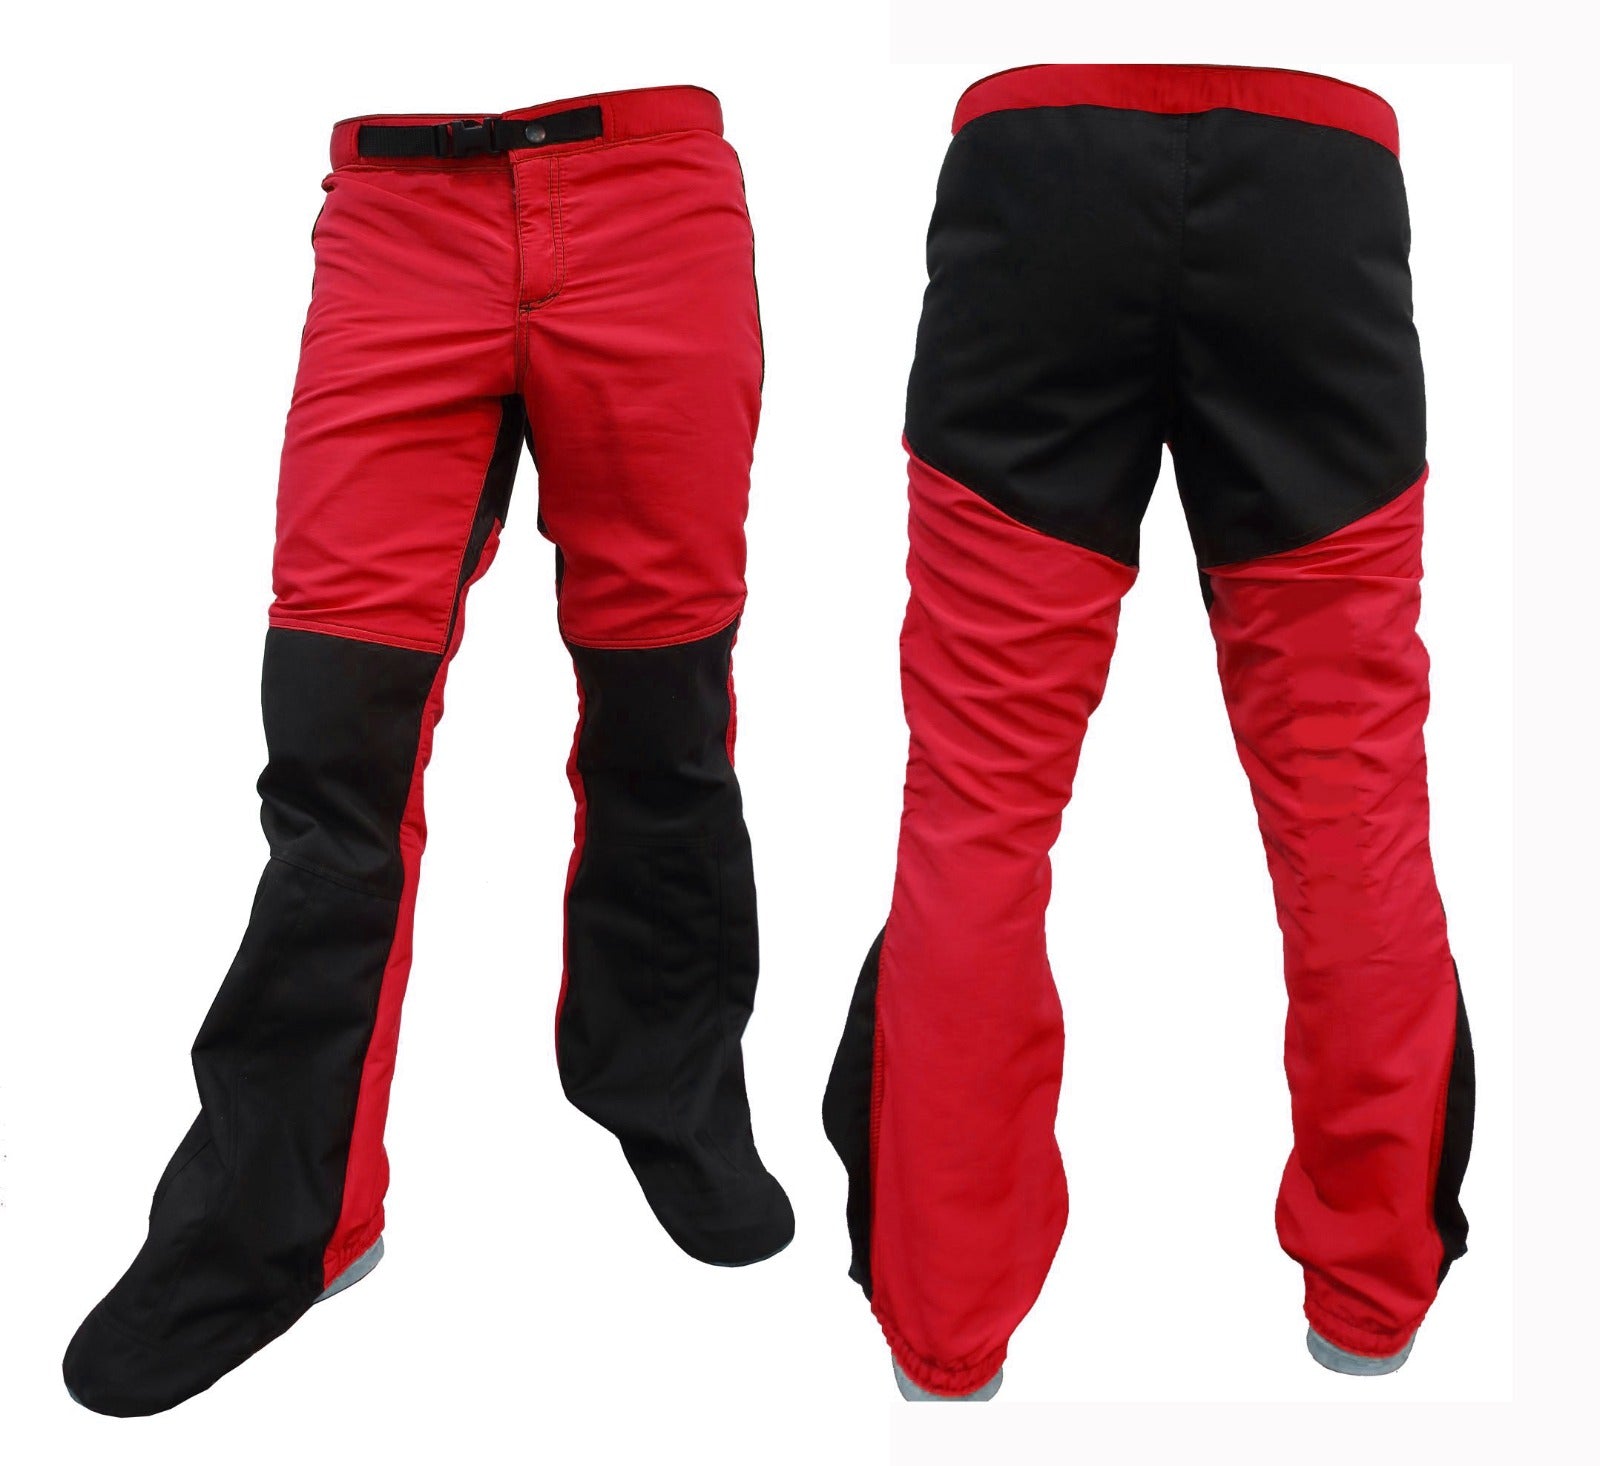 Skydiving pants with booties -